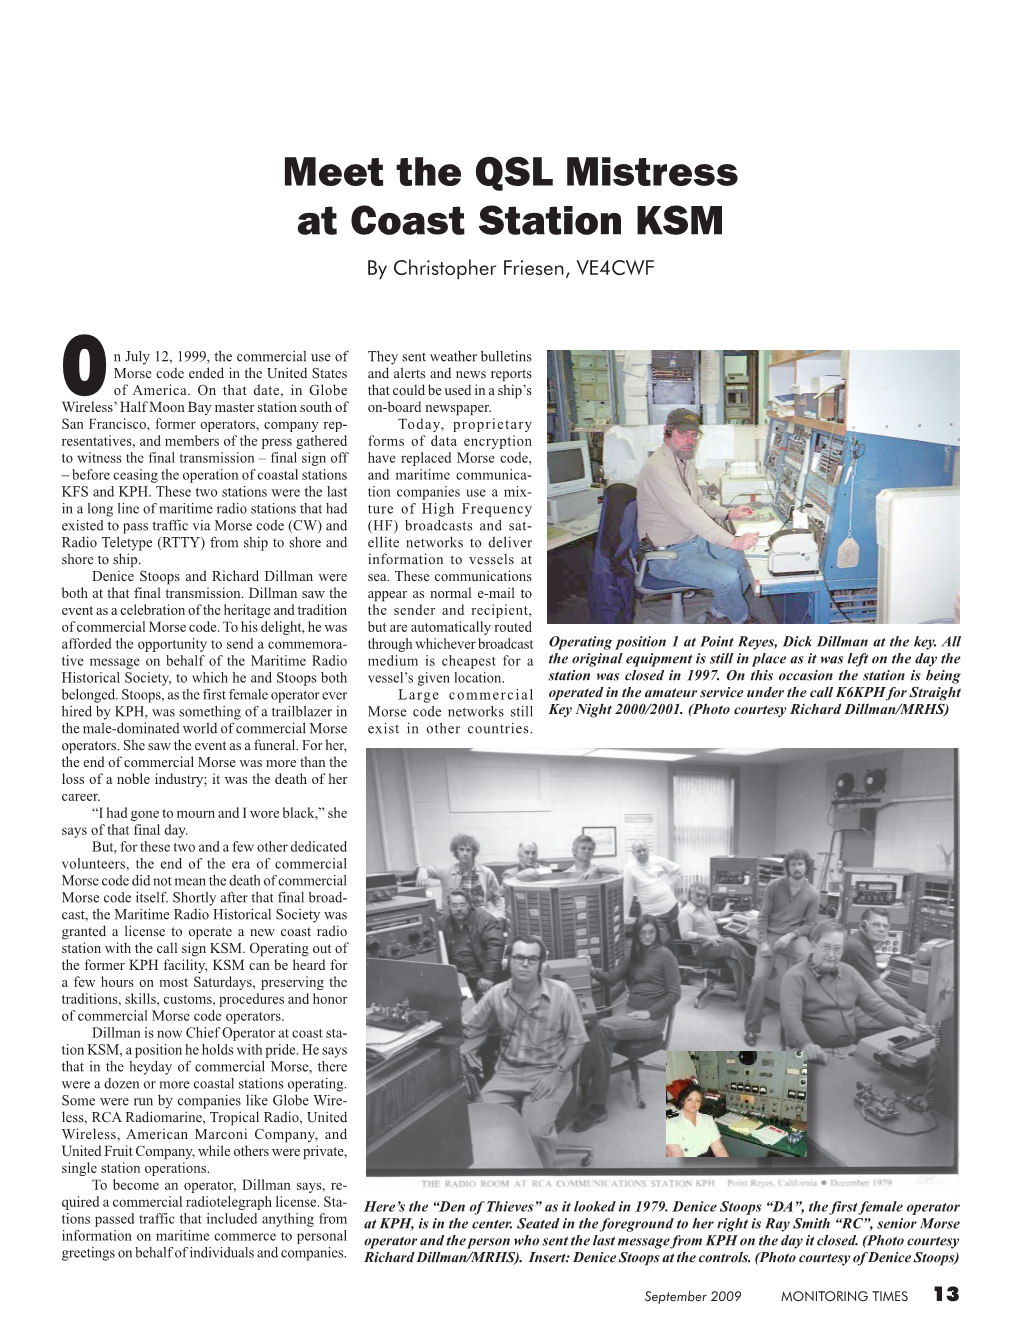 Meet the QSL Mistress at Coast Station KSM by Christopher Friesen, VE4CWF